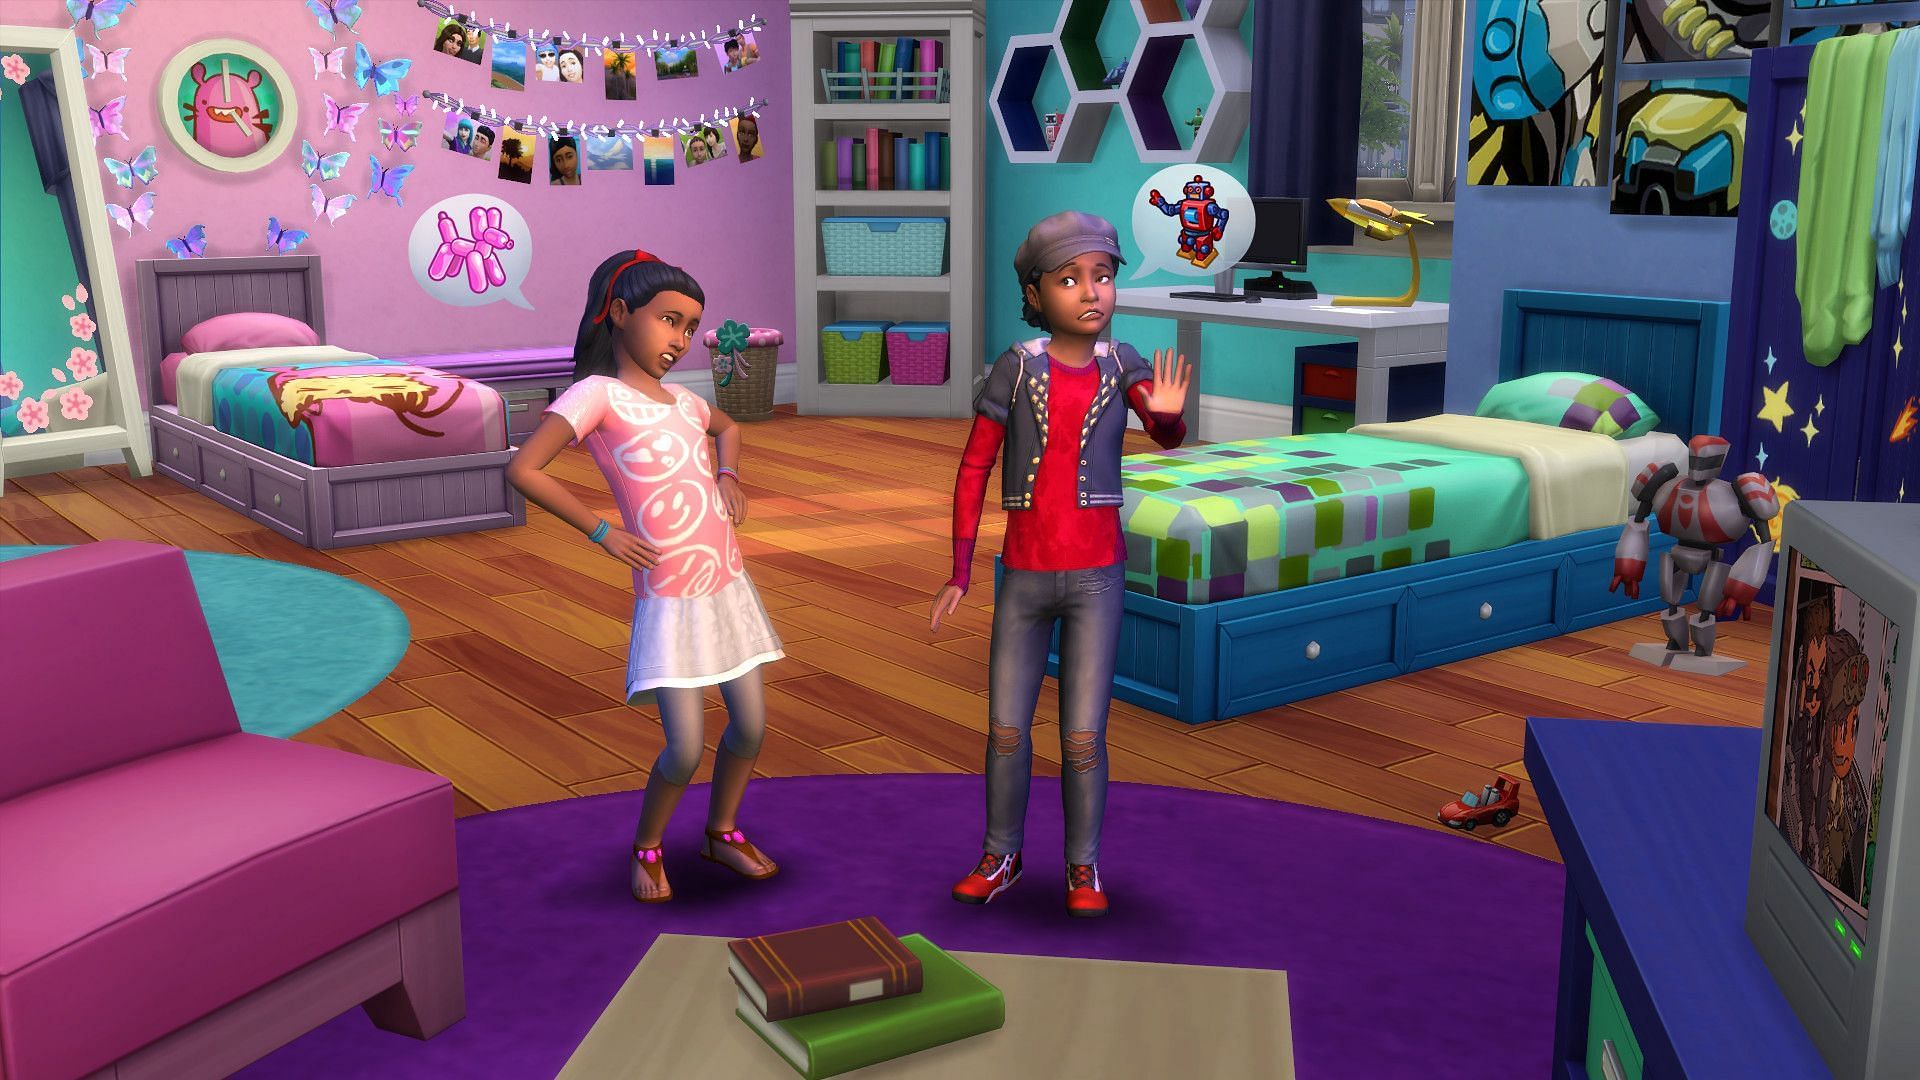 Kid&#039;s bedrooms in Sims 4 lack any proper themed designs (Image via Electronic Arts)